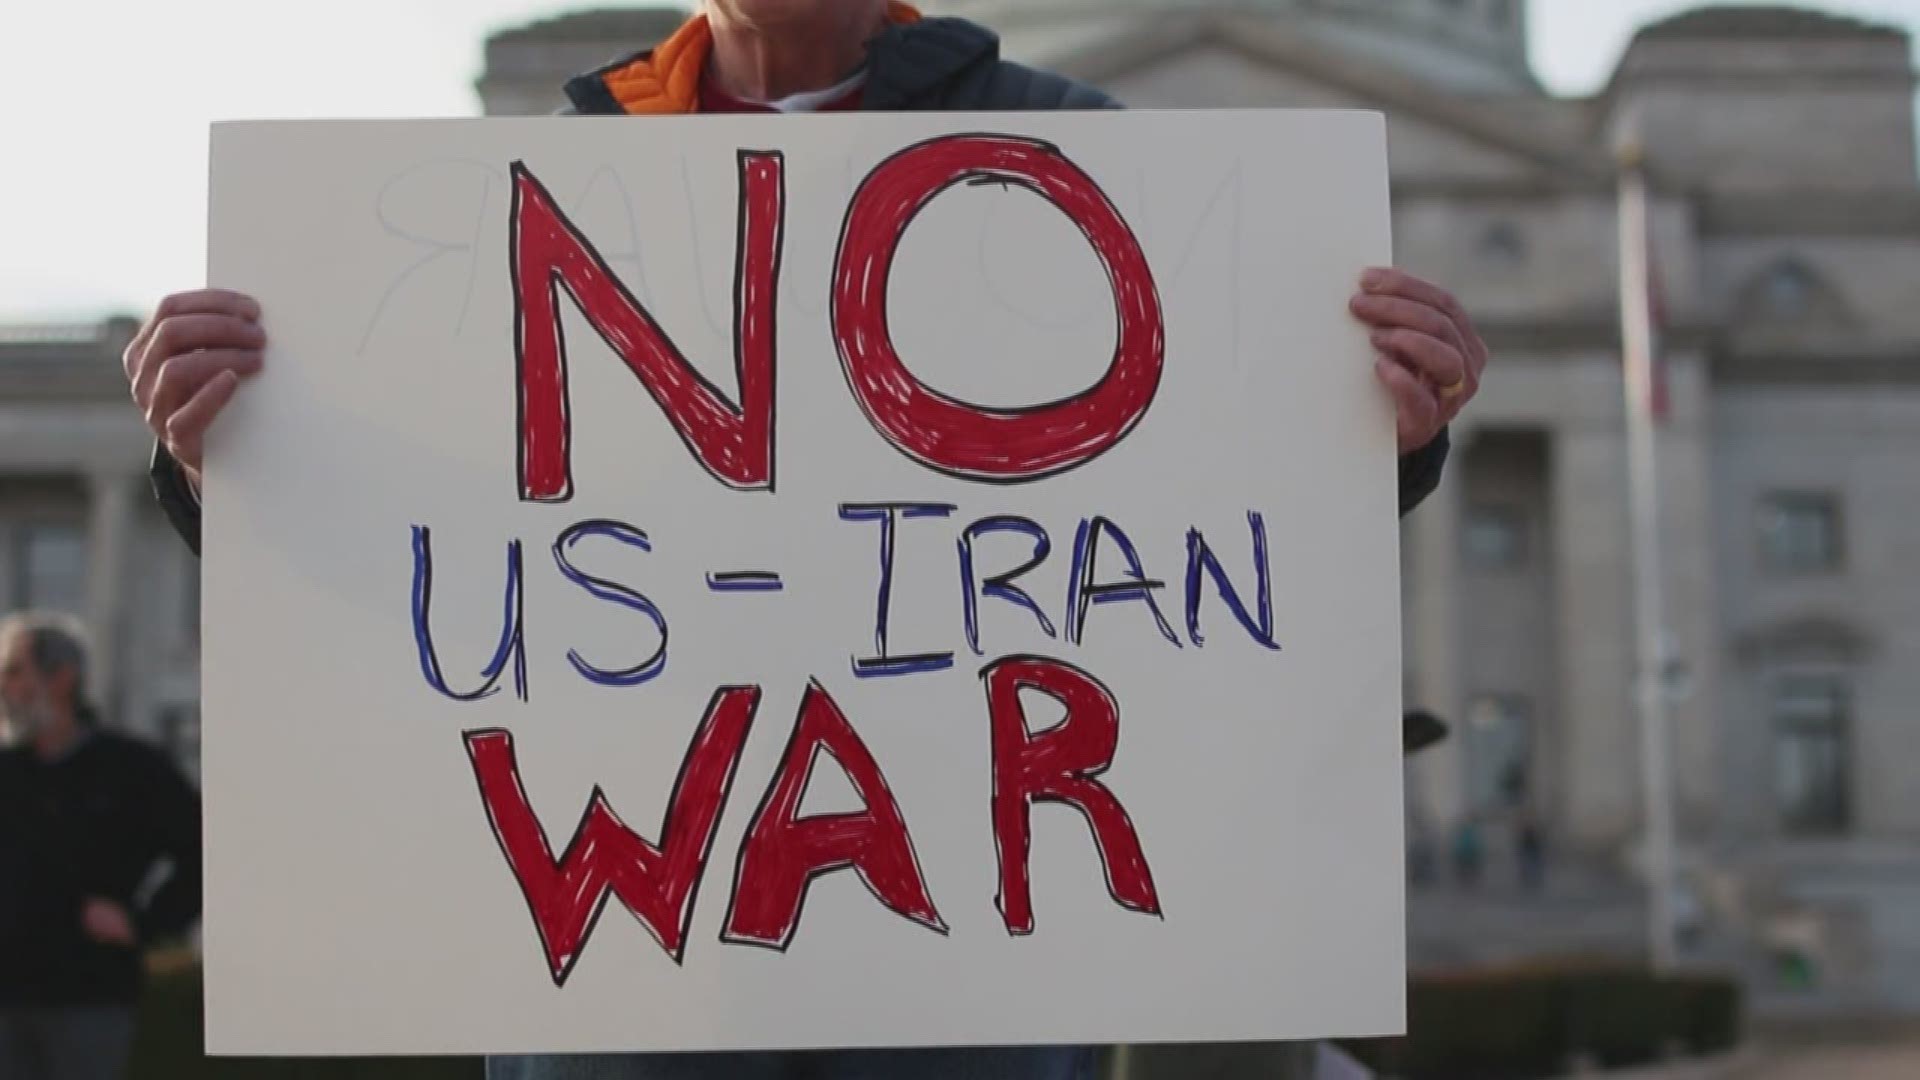 A rally on the Capitol's steps was held to let state leaders know some Arkansans are not in favor of going to war with Iran.